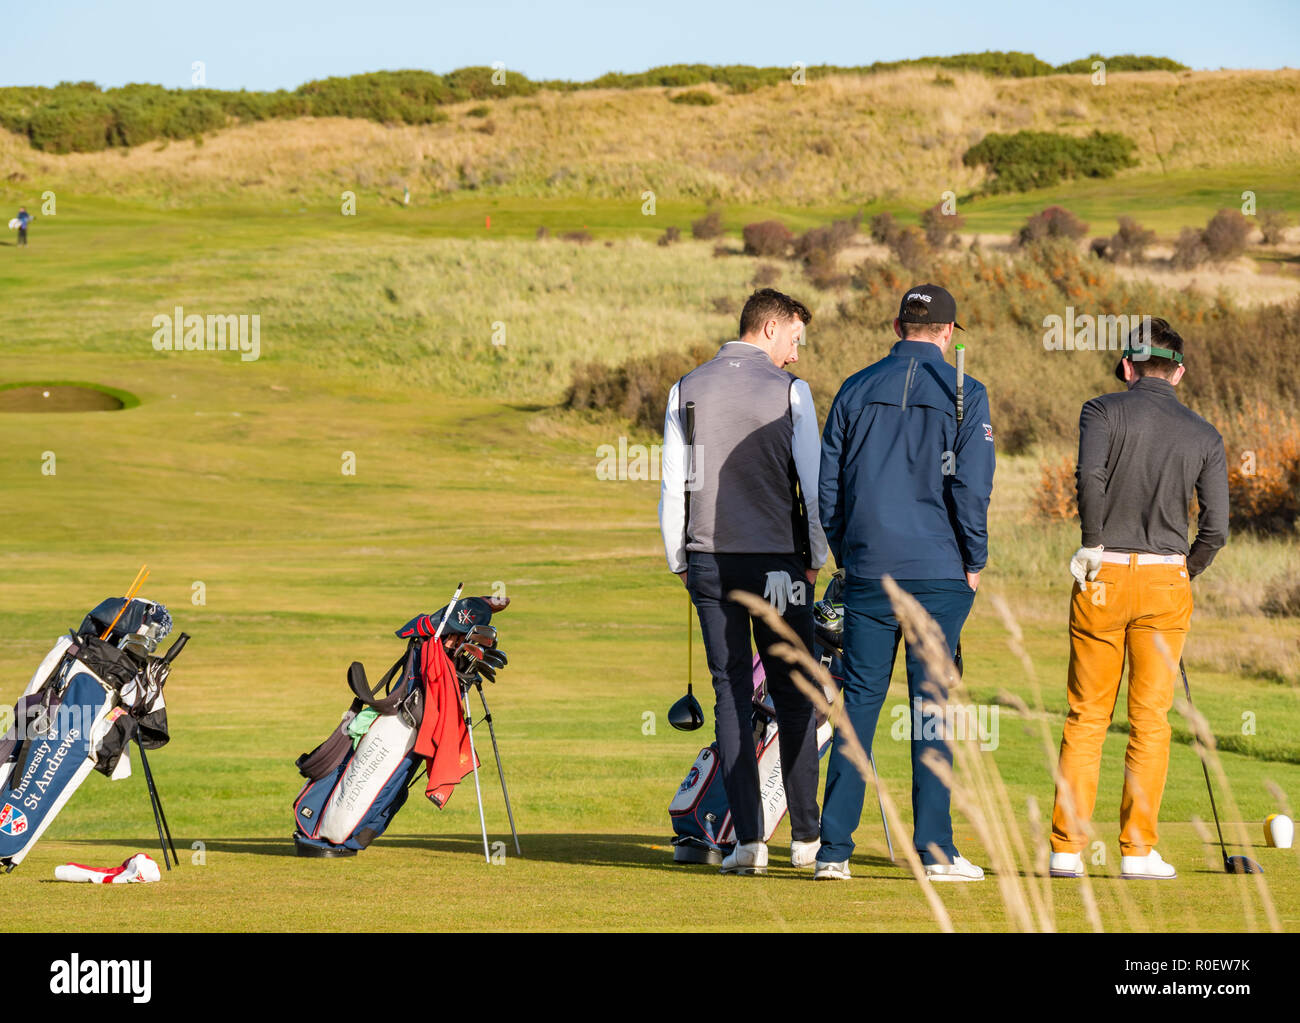 Aberlady nature reserve, East Lothian, Scotland, United Kingdom, 4th November 2018. UK Weather: warm sunny Autumn day on golf links. Young male golfers on Gullane golf course Stock Photo